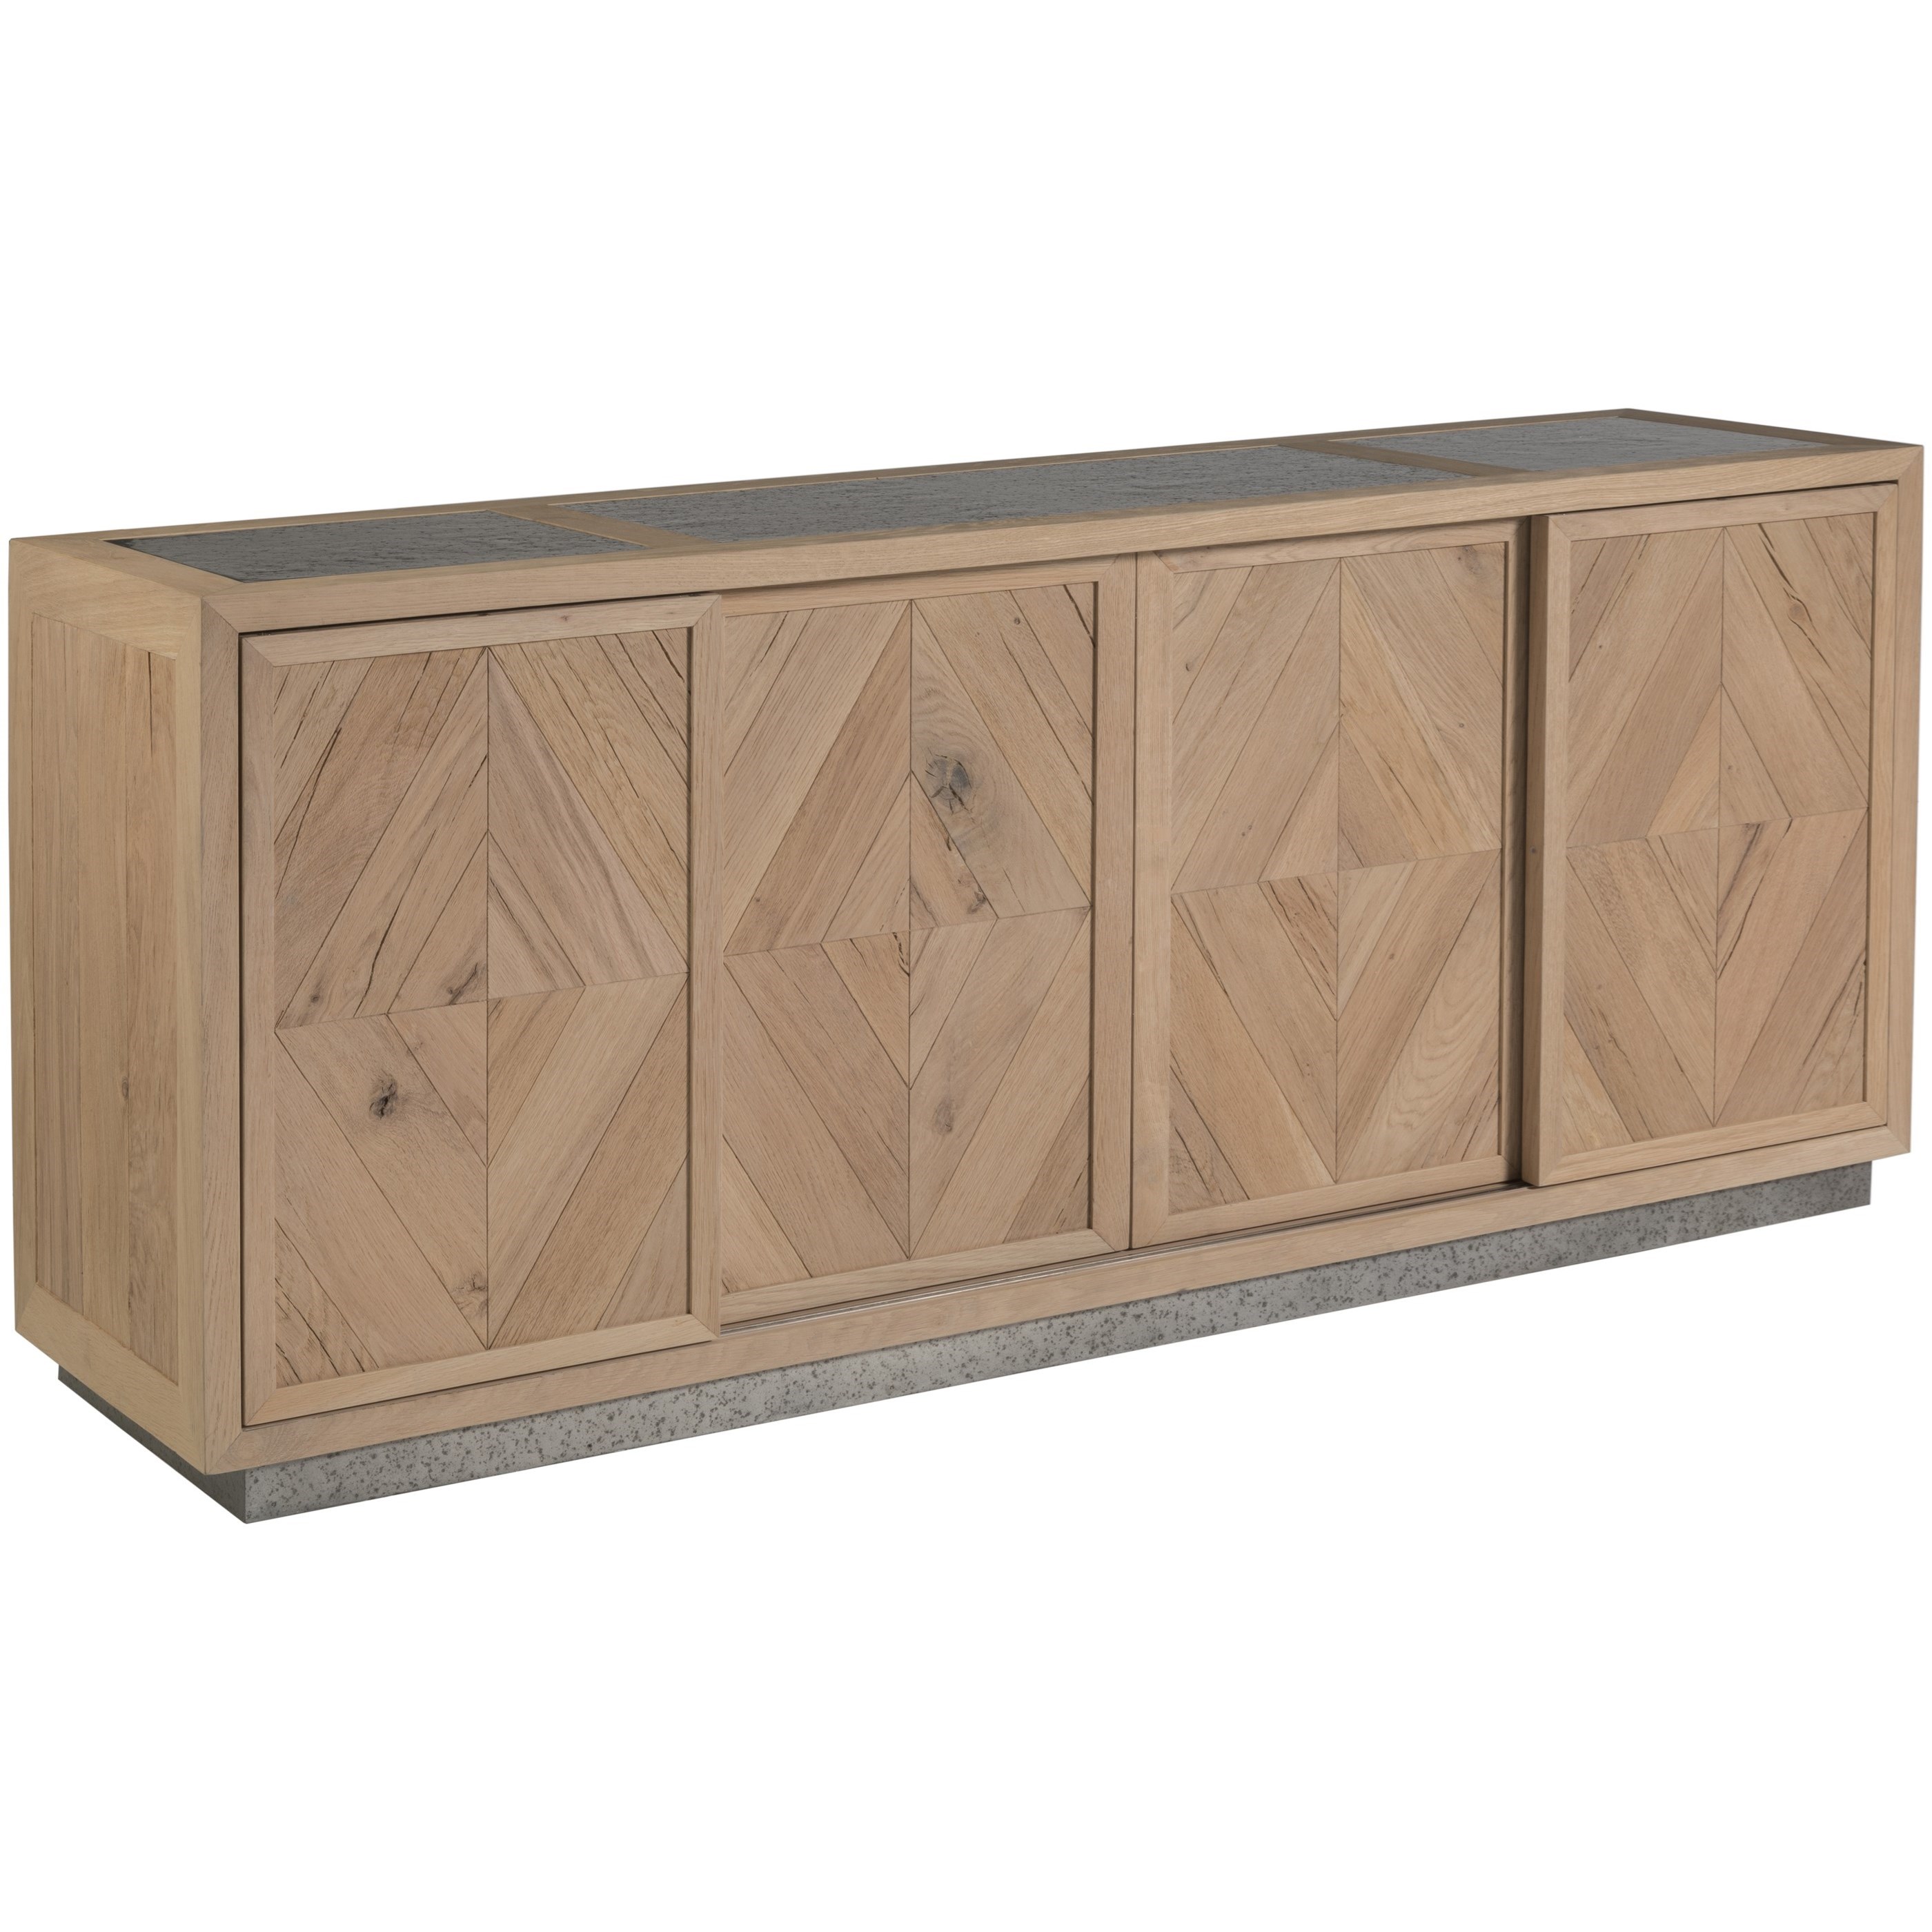 Modern Rustic 68 Inch TV Stand with Sliding Doors